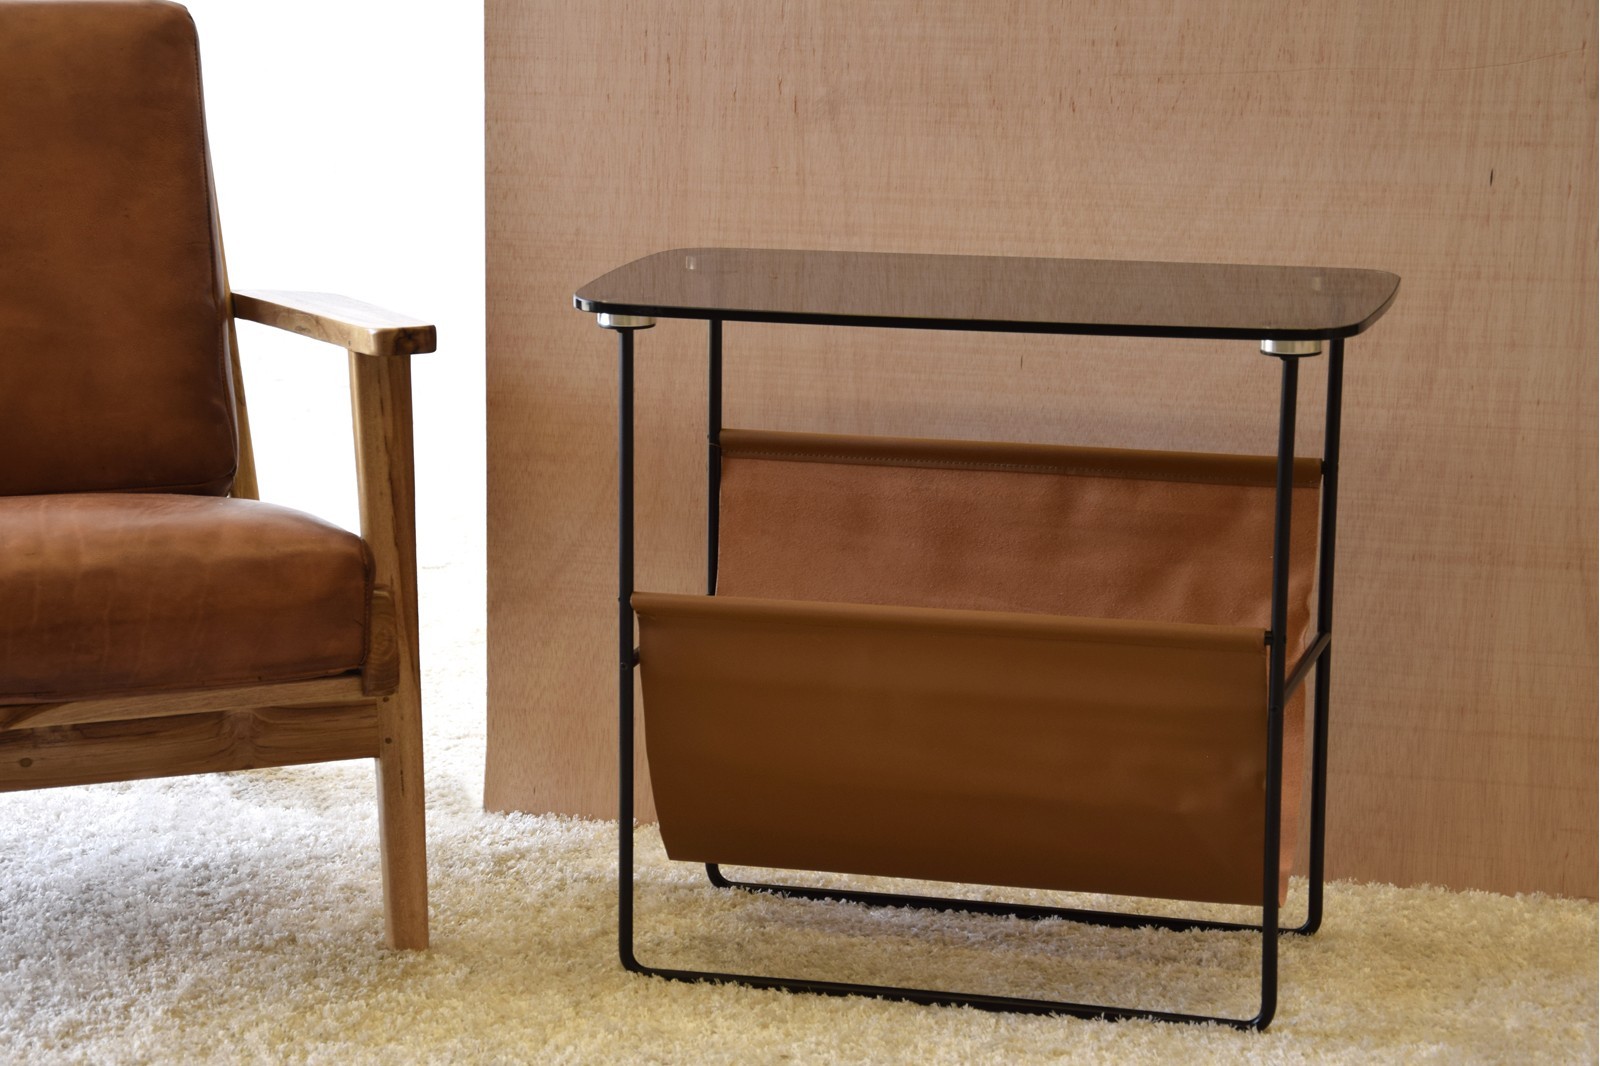 SIDE TABLE WITH FOLDER